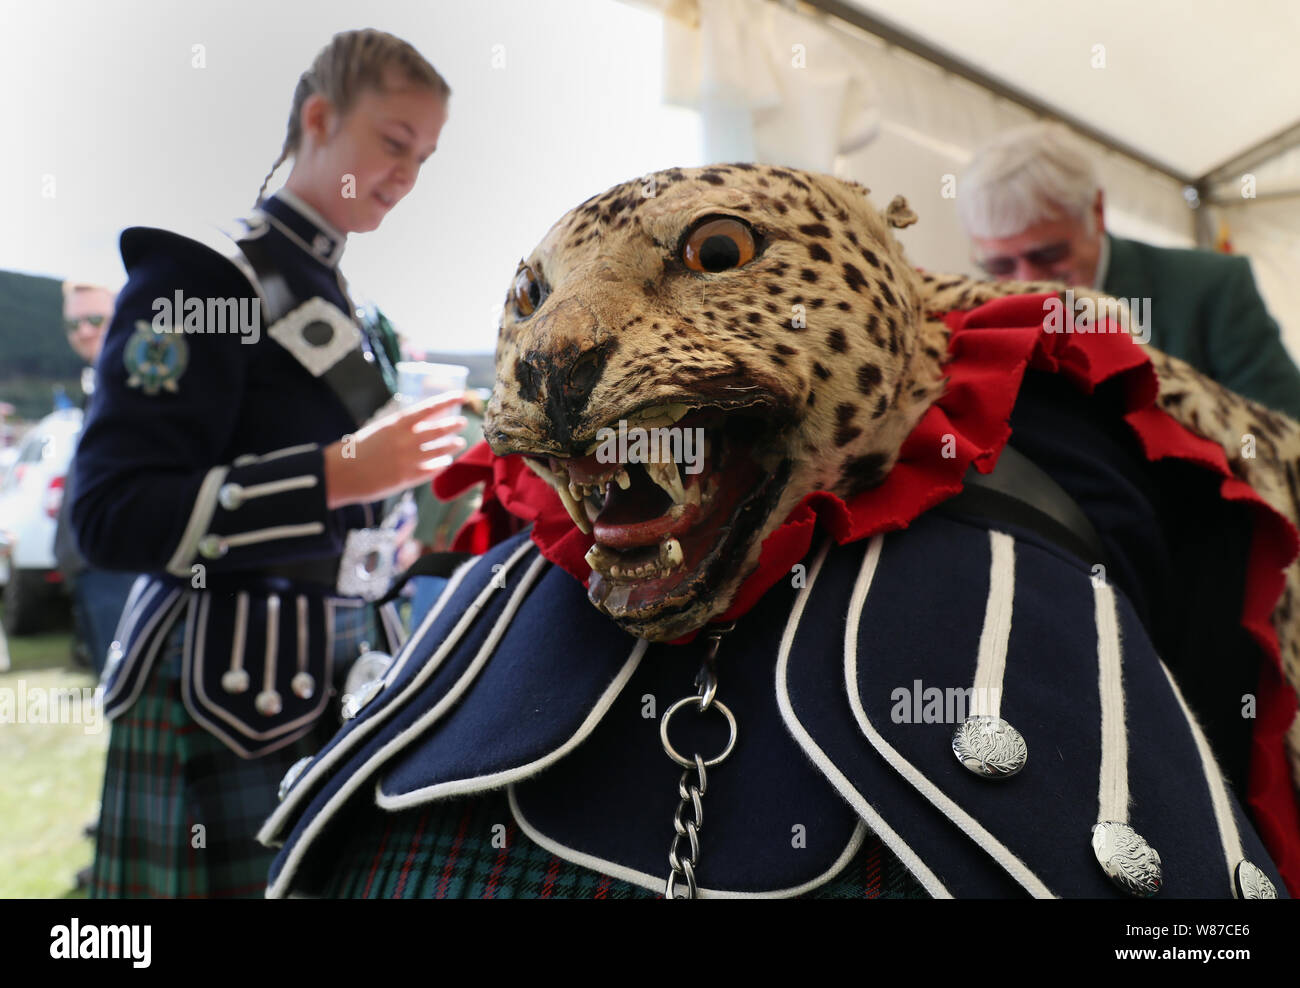 A band member from the Ballater and District pipe band wears a leopard skin base drum apron. The Prince of Wales, known as the Duke of Rothesay while in Scotland, is attending the Ballater Highland Games in Monaltrie Park. Stock Photo